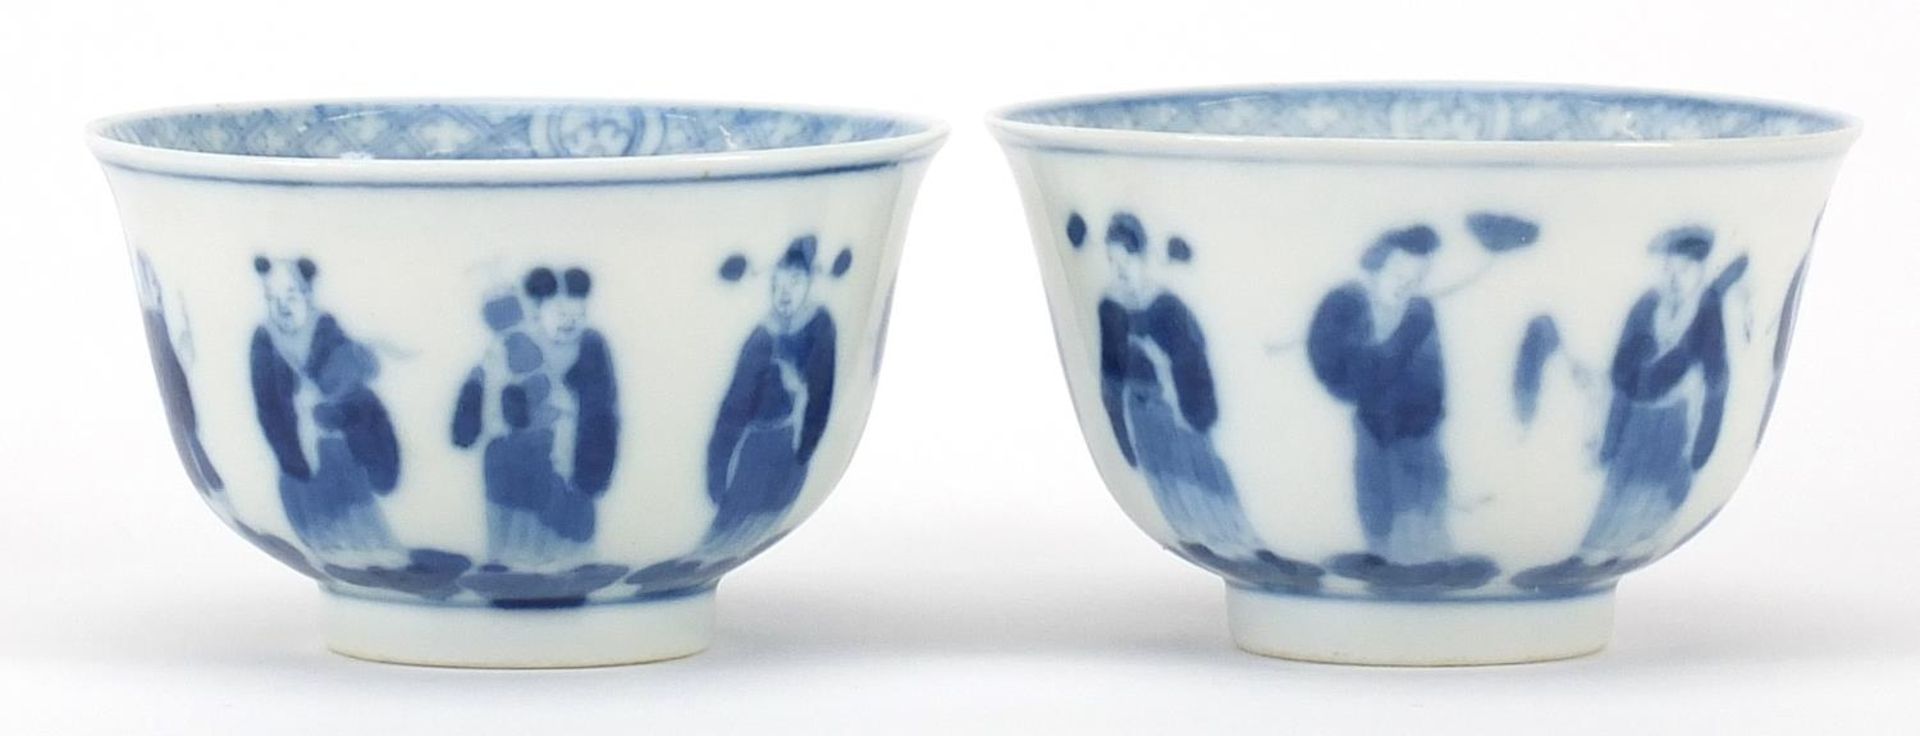 Pair of Chinese blue and white porcelain tea bowls hand painted with figures, four figure